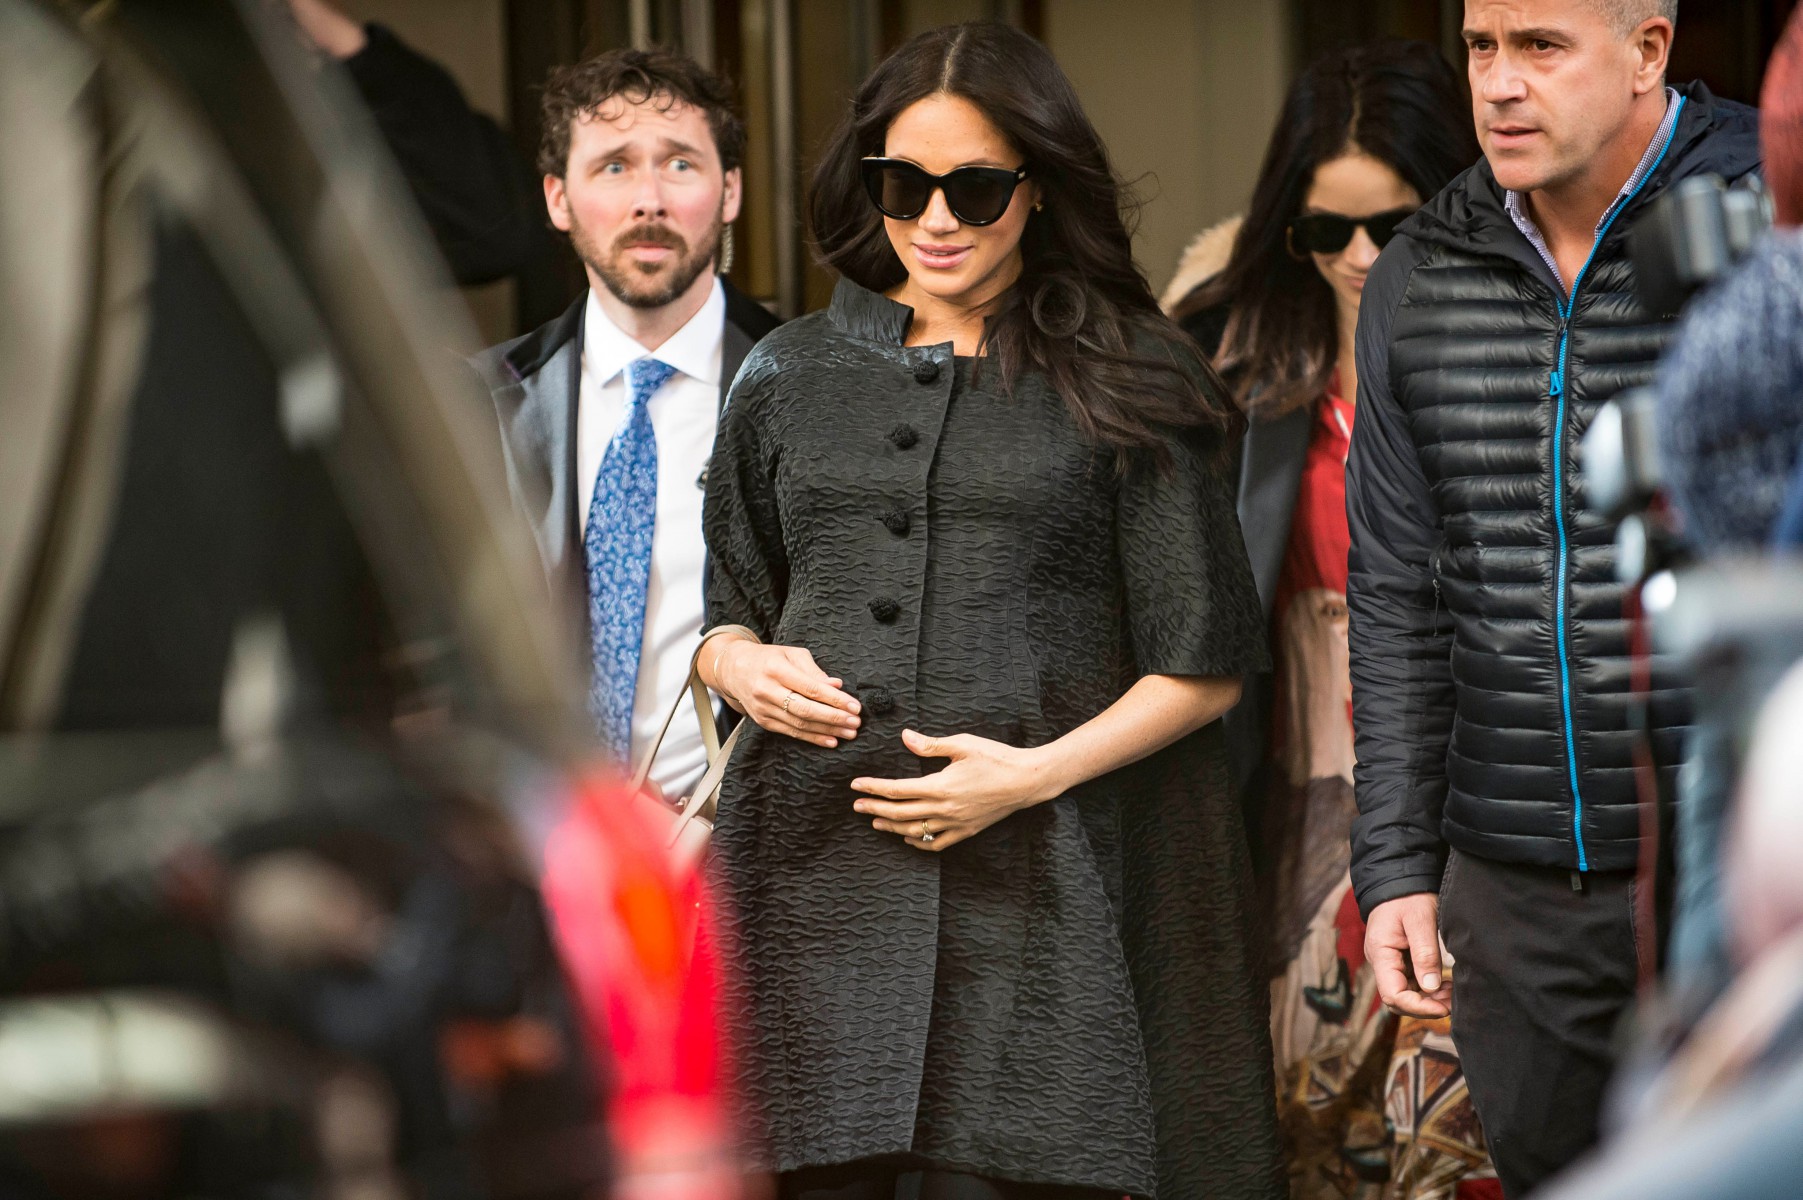 Meghan Markle had her baby shower in the hotel earlier this year